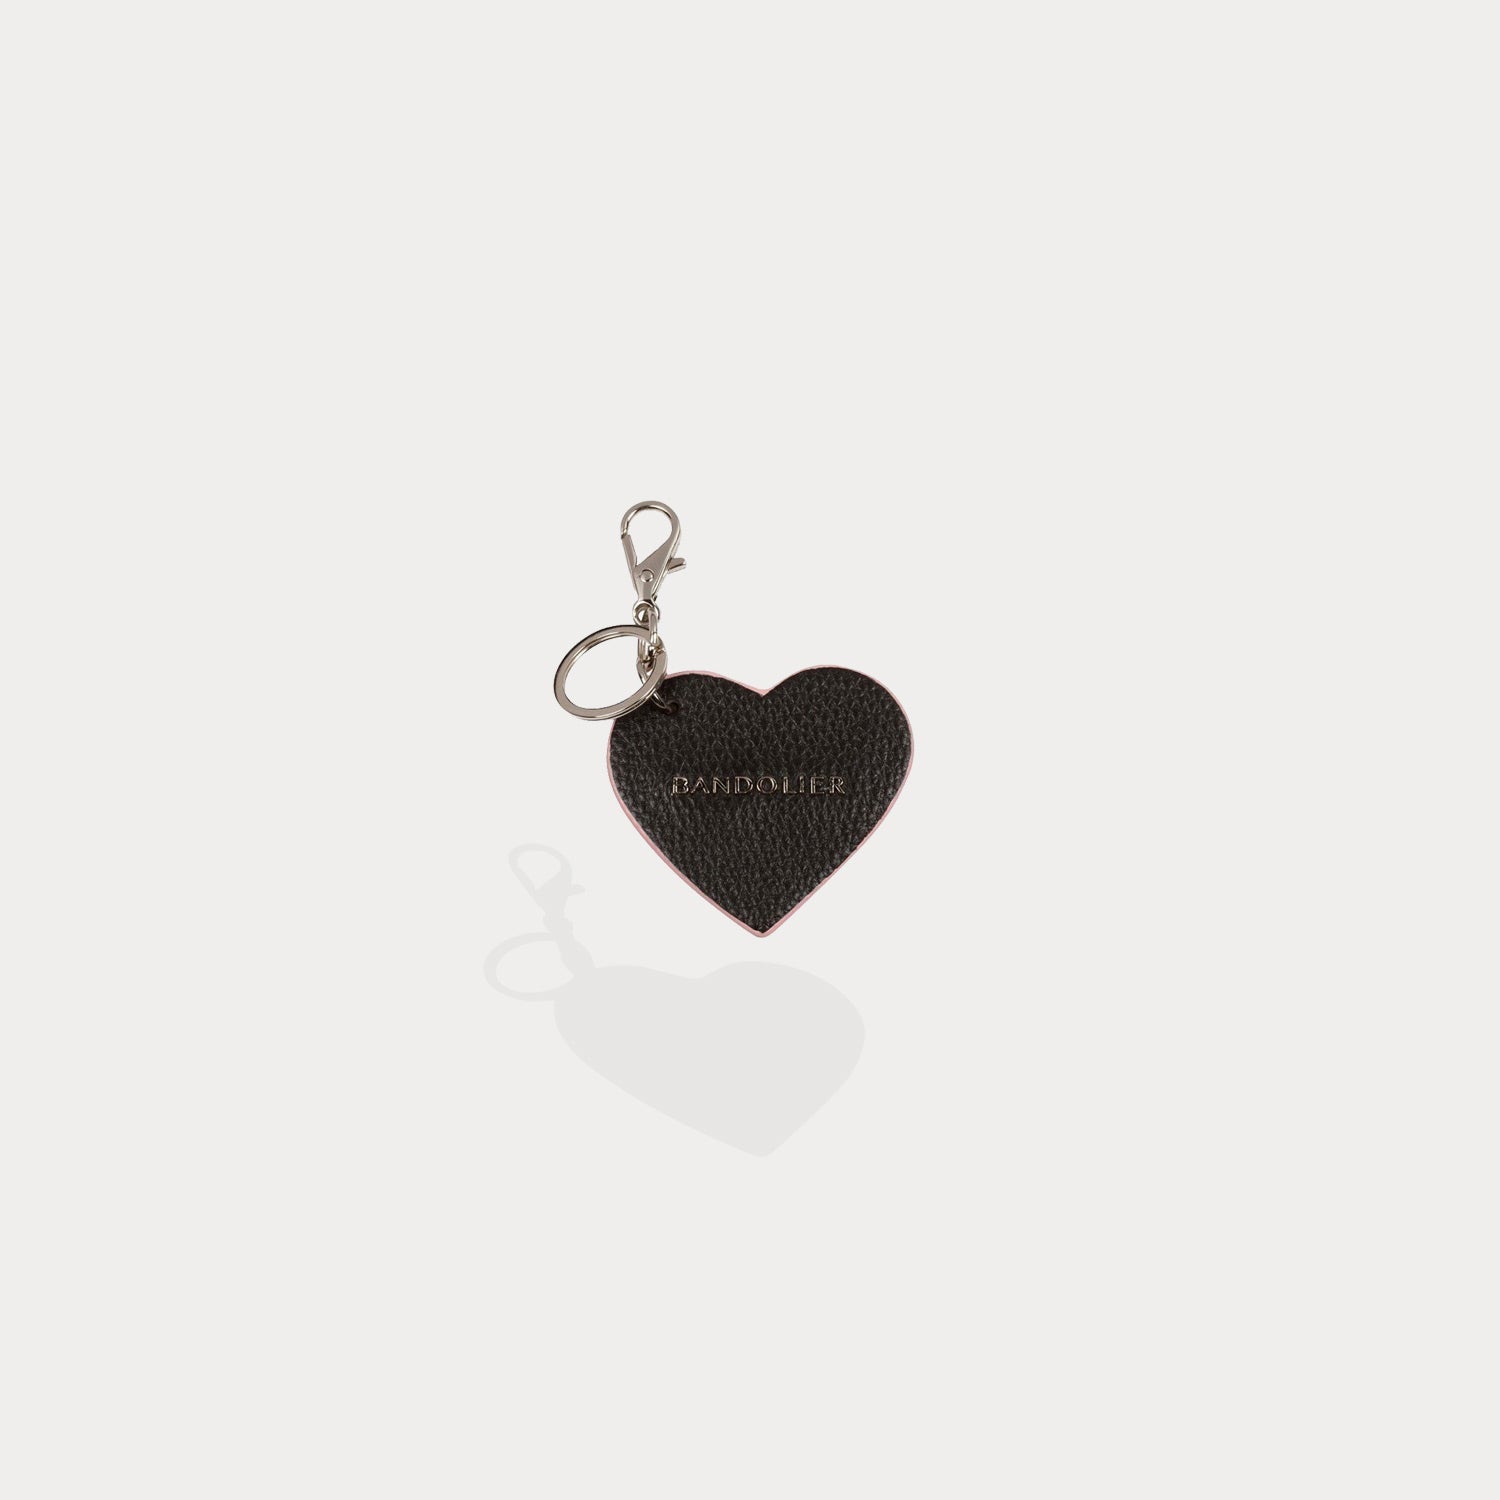 Heart shaped key chain made from Louis Vuitton canvas- red leather